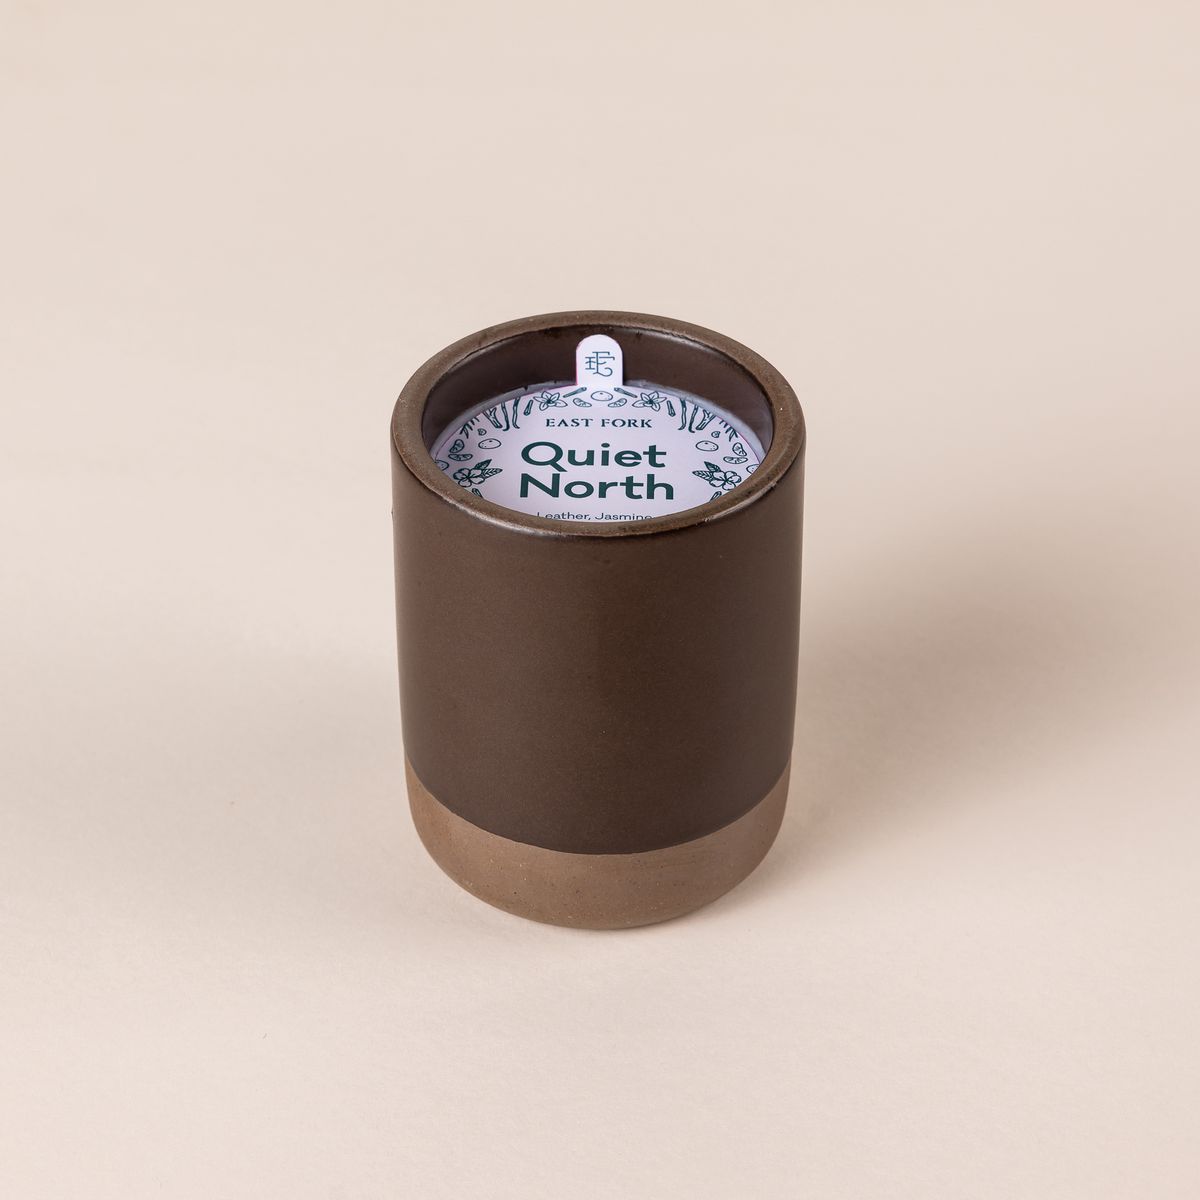 Large ceramic vessel in a dark cool brown color with candle inside. On top is a packaging label sitting on top that reads "Quiet North"